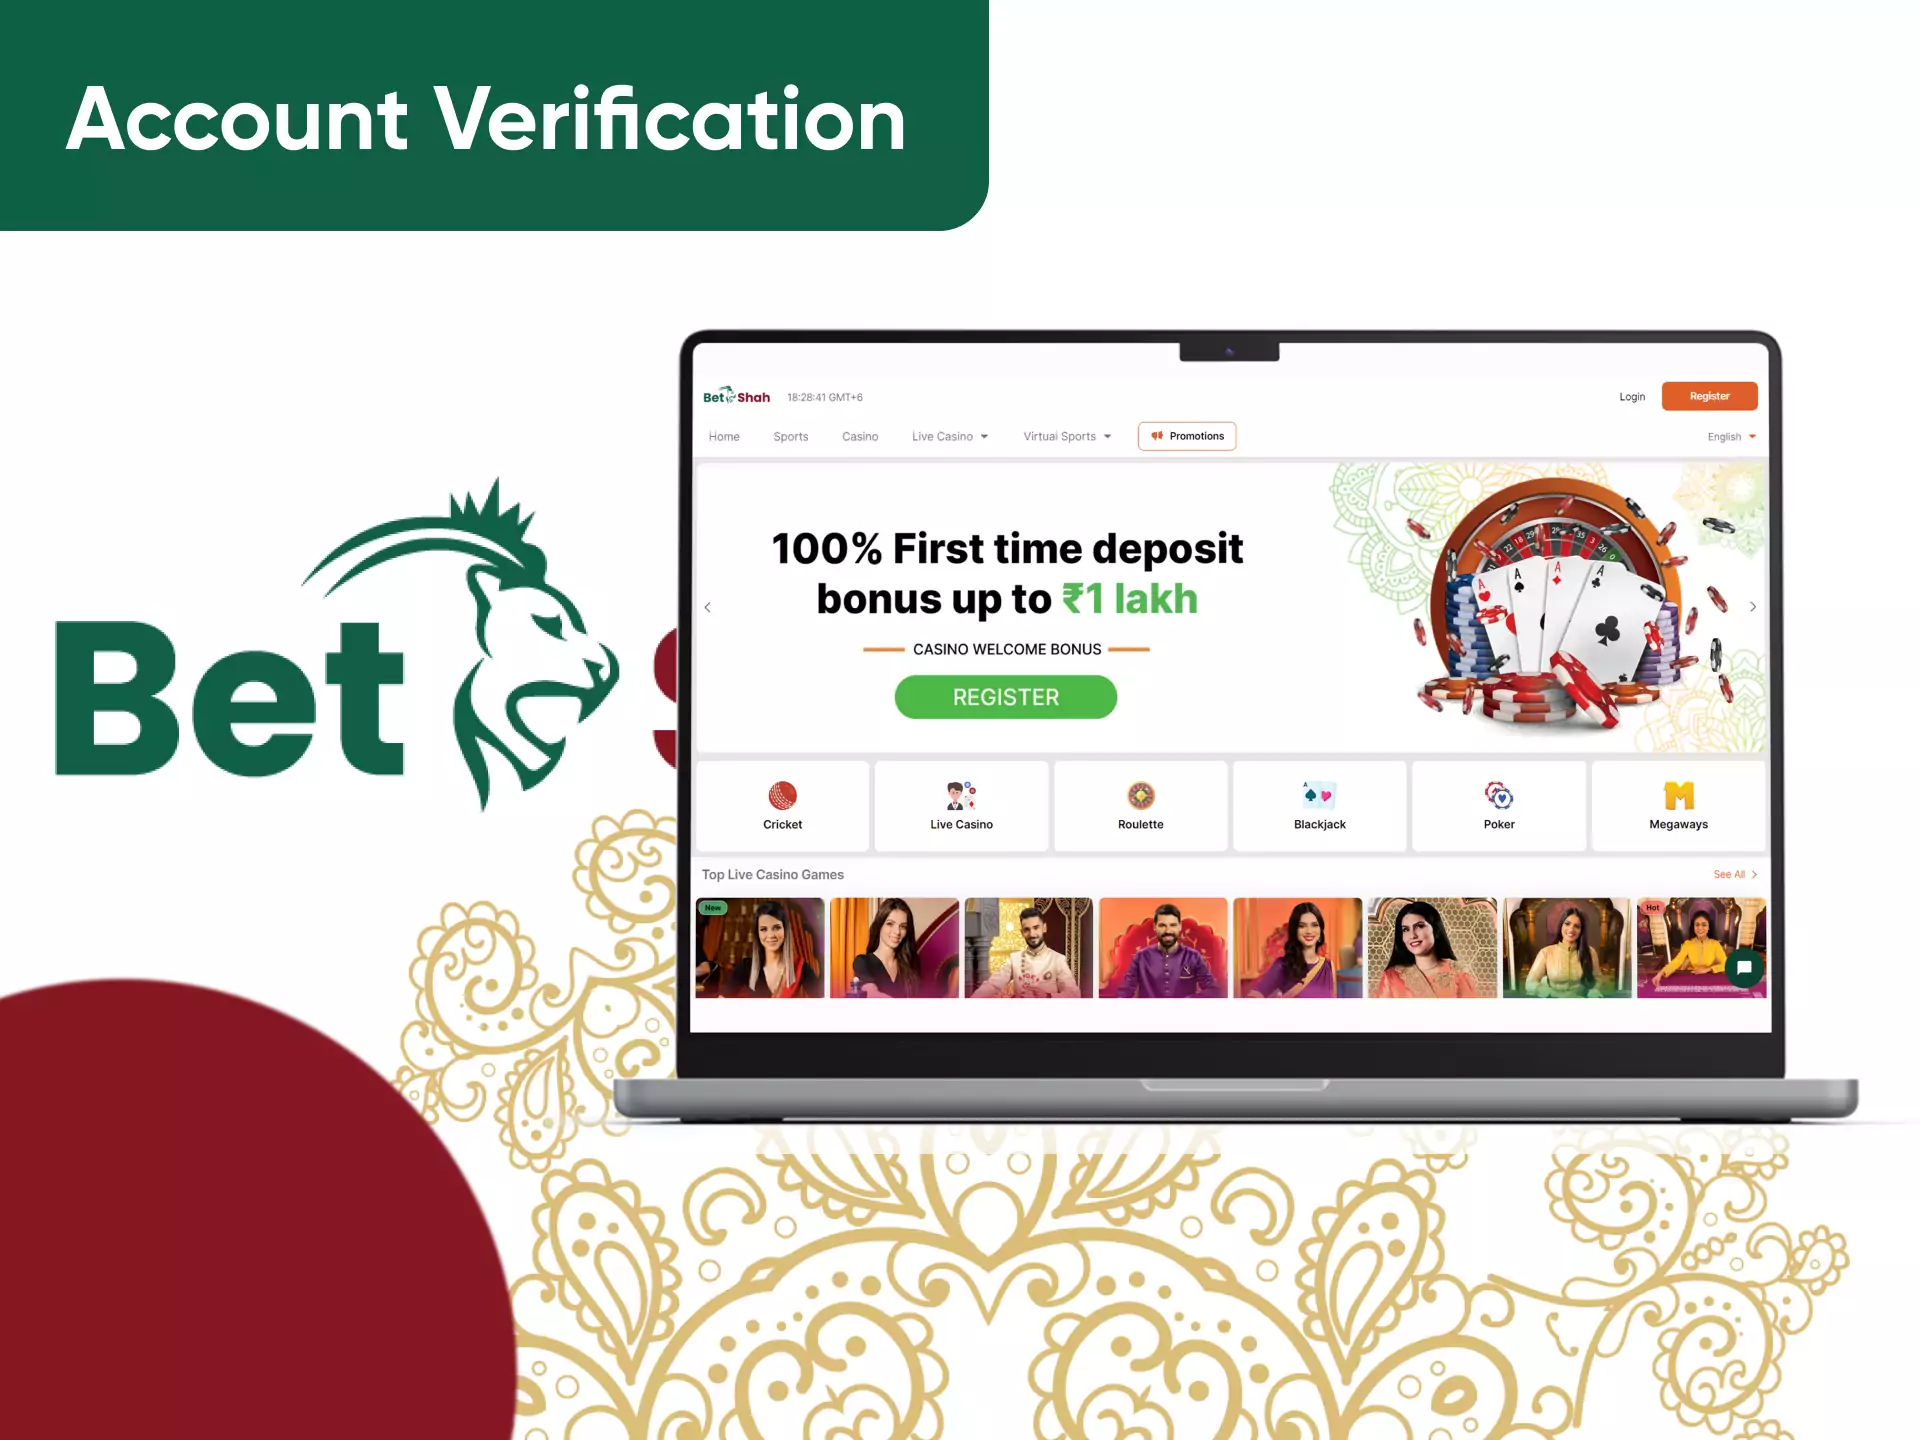 Before starting, you have to verify your Betshah account.